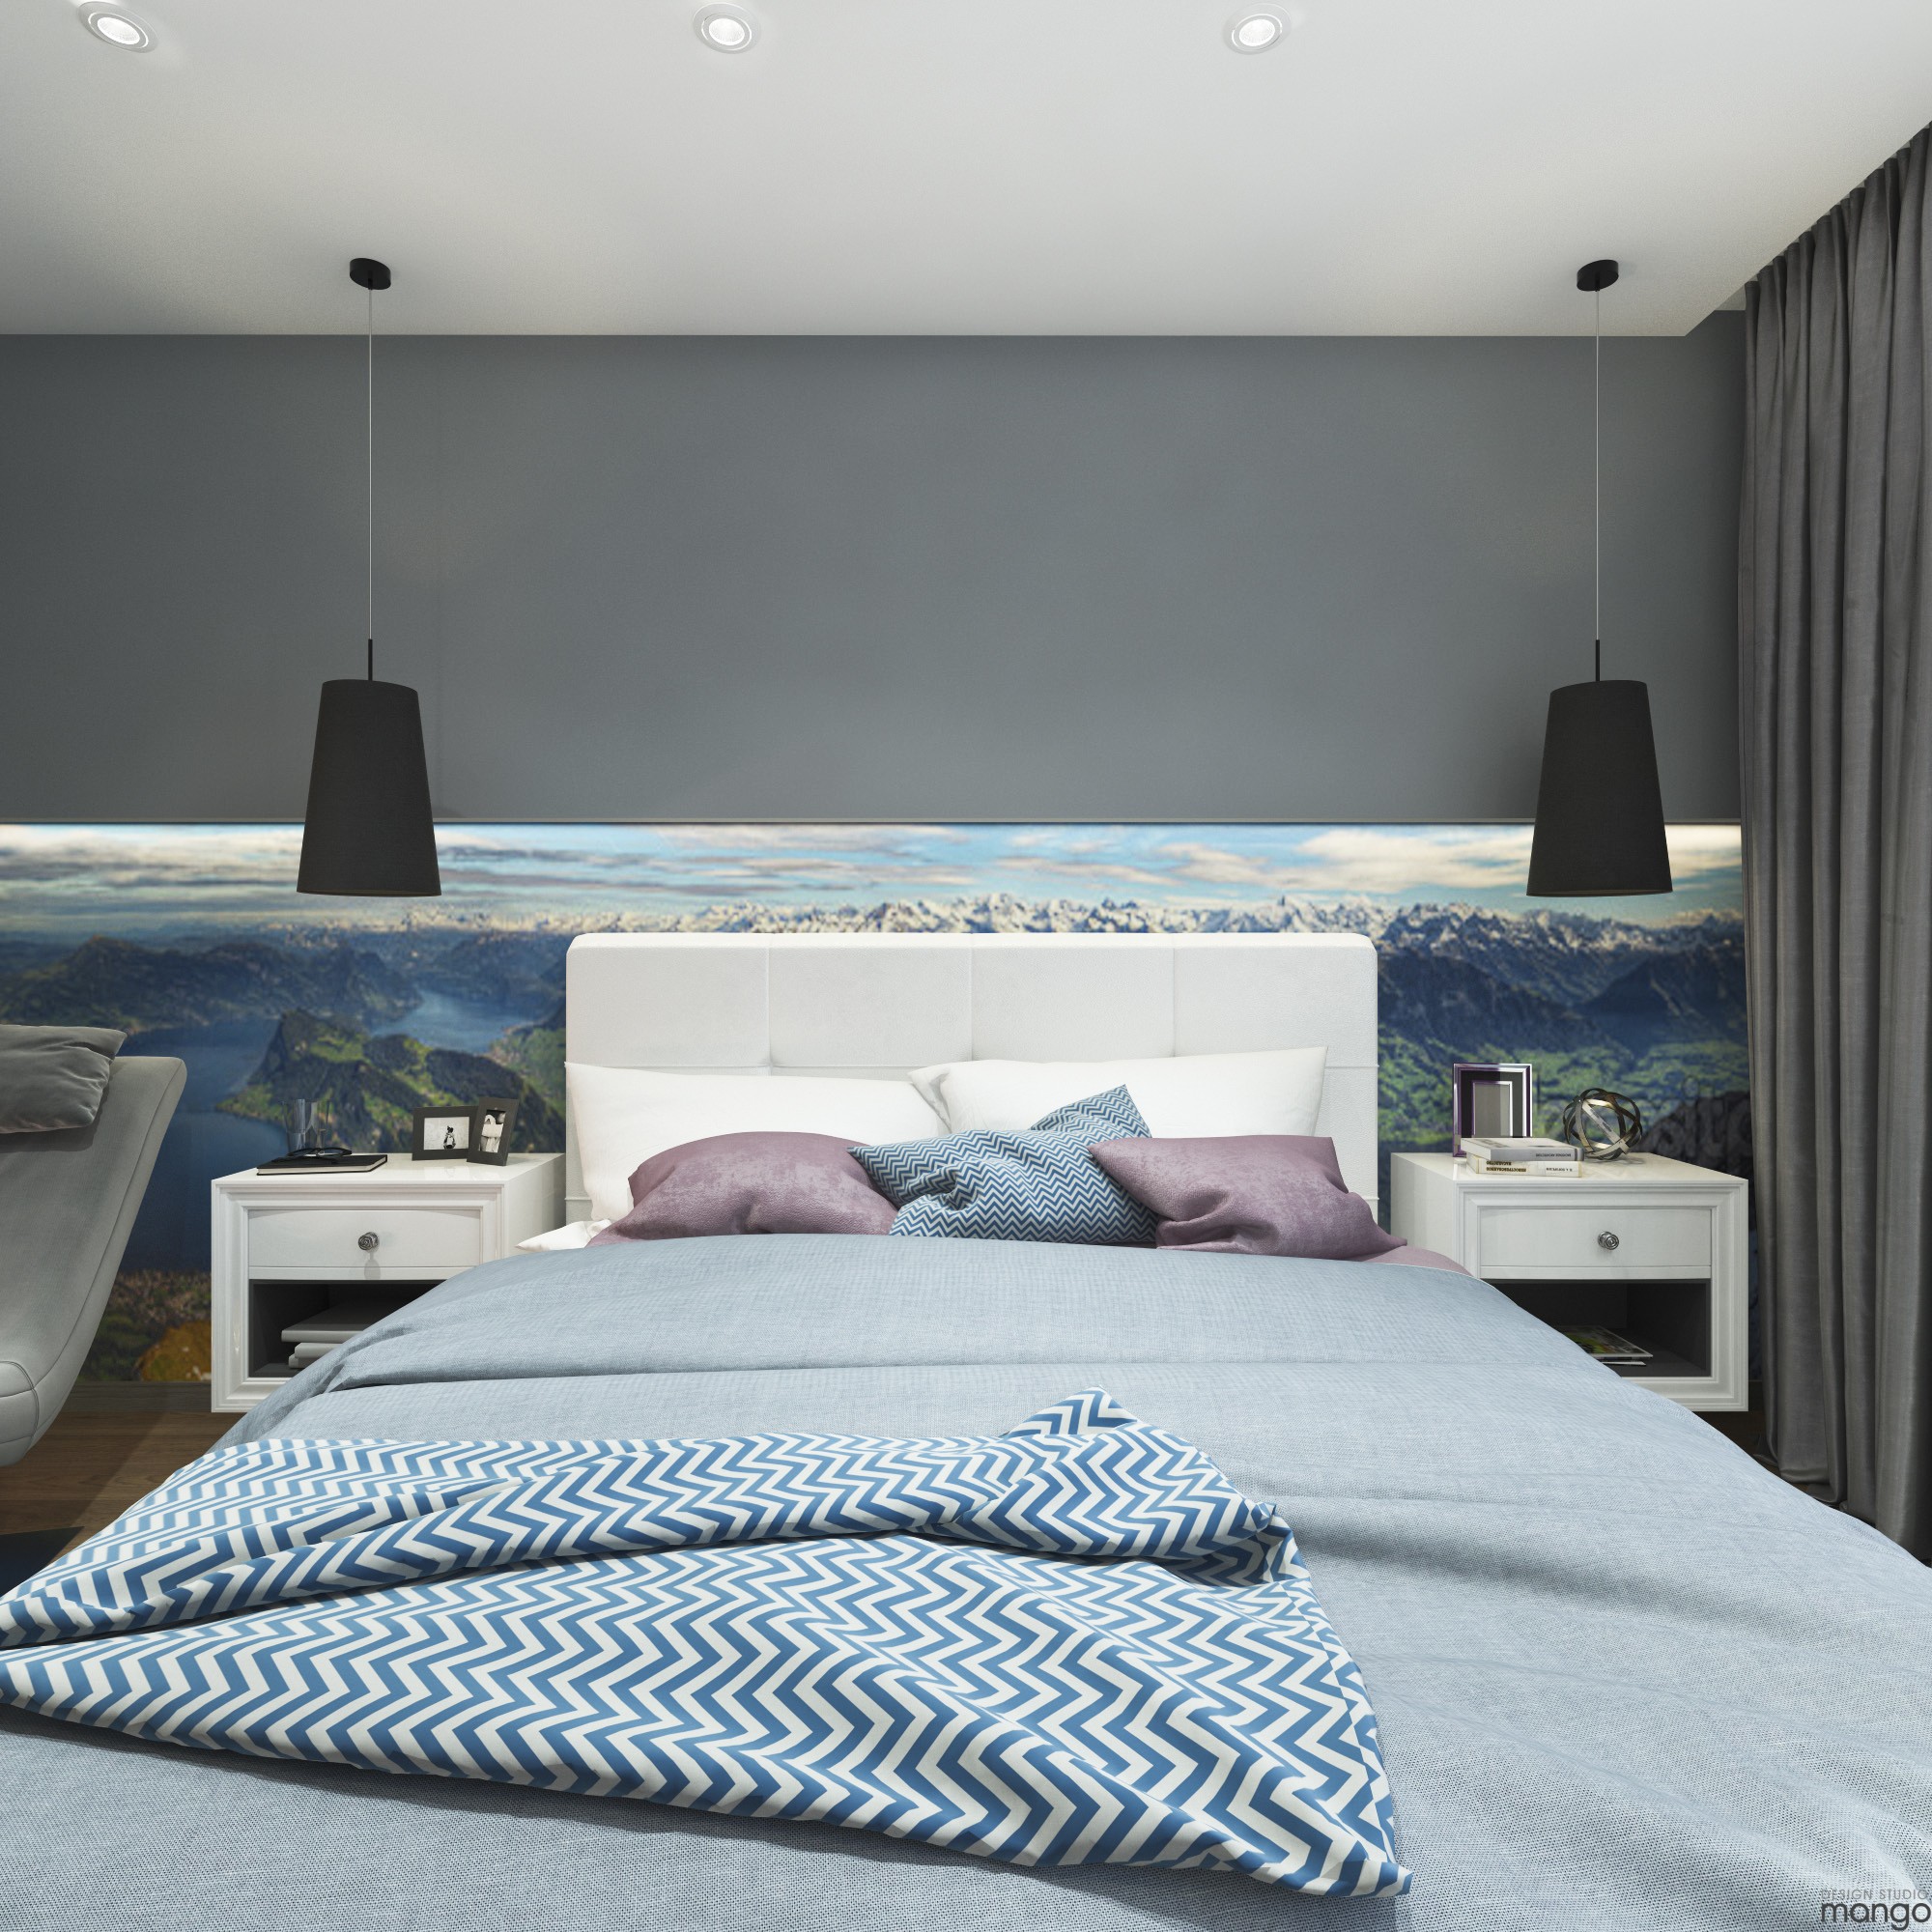 modern bedroom design "width =" 2000 "height =" 2000 "srcset =" https://mileray.com/wp-content/uploads/2020/05/1588508606_445_Inspiration-Of-Bedroom-Decorating-Ideas-Which-Applying-a-Trendy-Design.jpg 2000w, https: // myfashionos .com / wp-content / uploads / 2016/11 / Design-Studio-Mango1-7-150x150.jpg 150w, https://mileray.com/wp-content/uploads/2016/11/Design-Studio-Mango1 - 7-300x300.jpg 300w, https://mileray.com/wp-content/uploads/2016/11/Design-Studio-Mango1-7-768x768.jpg 768w, https://mileray.com/wp-content / uploads / 2016/11 / Design-Studio-Mango1-7-1024x1024.jpg 1024w, https://mileray.com/wp-content/uploads/2016/11/Design-Studio-Mango1-7-696x696.jpg 696w, https://mileray.com/wp-content/uploads/2016/11/Design-Studio-Mango1-7-1068x1068.jpg 1068w, https://mileray.com/wp-content/uploads/2016/11/ Design -Studio-Mango1-7-420x420.jpg 420w "sizes =" (maximum width: 2000px) 100vw, 2000px